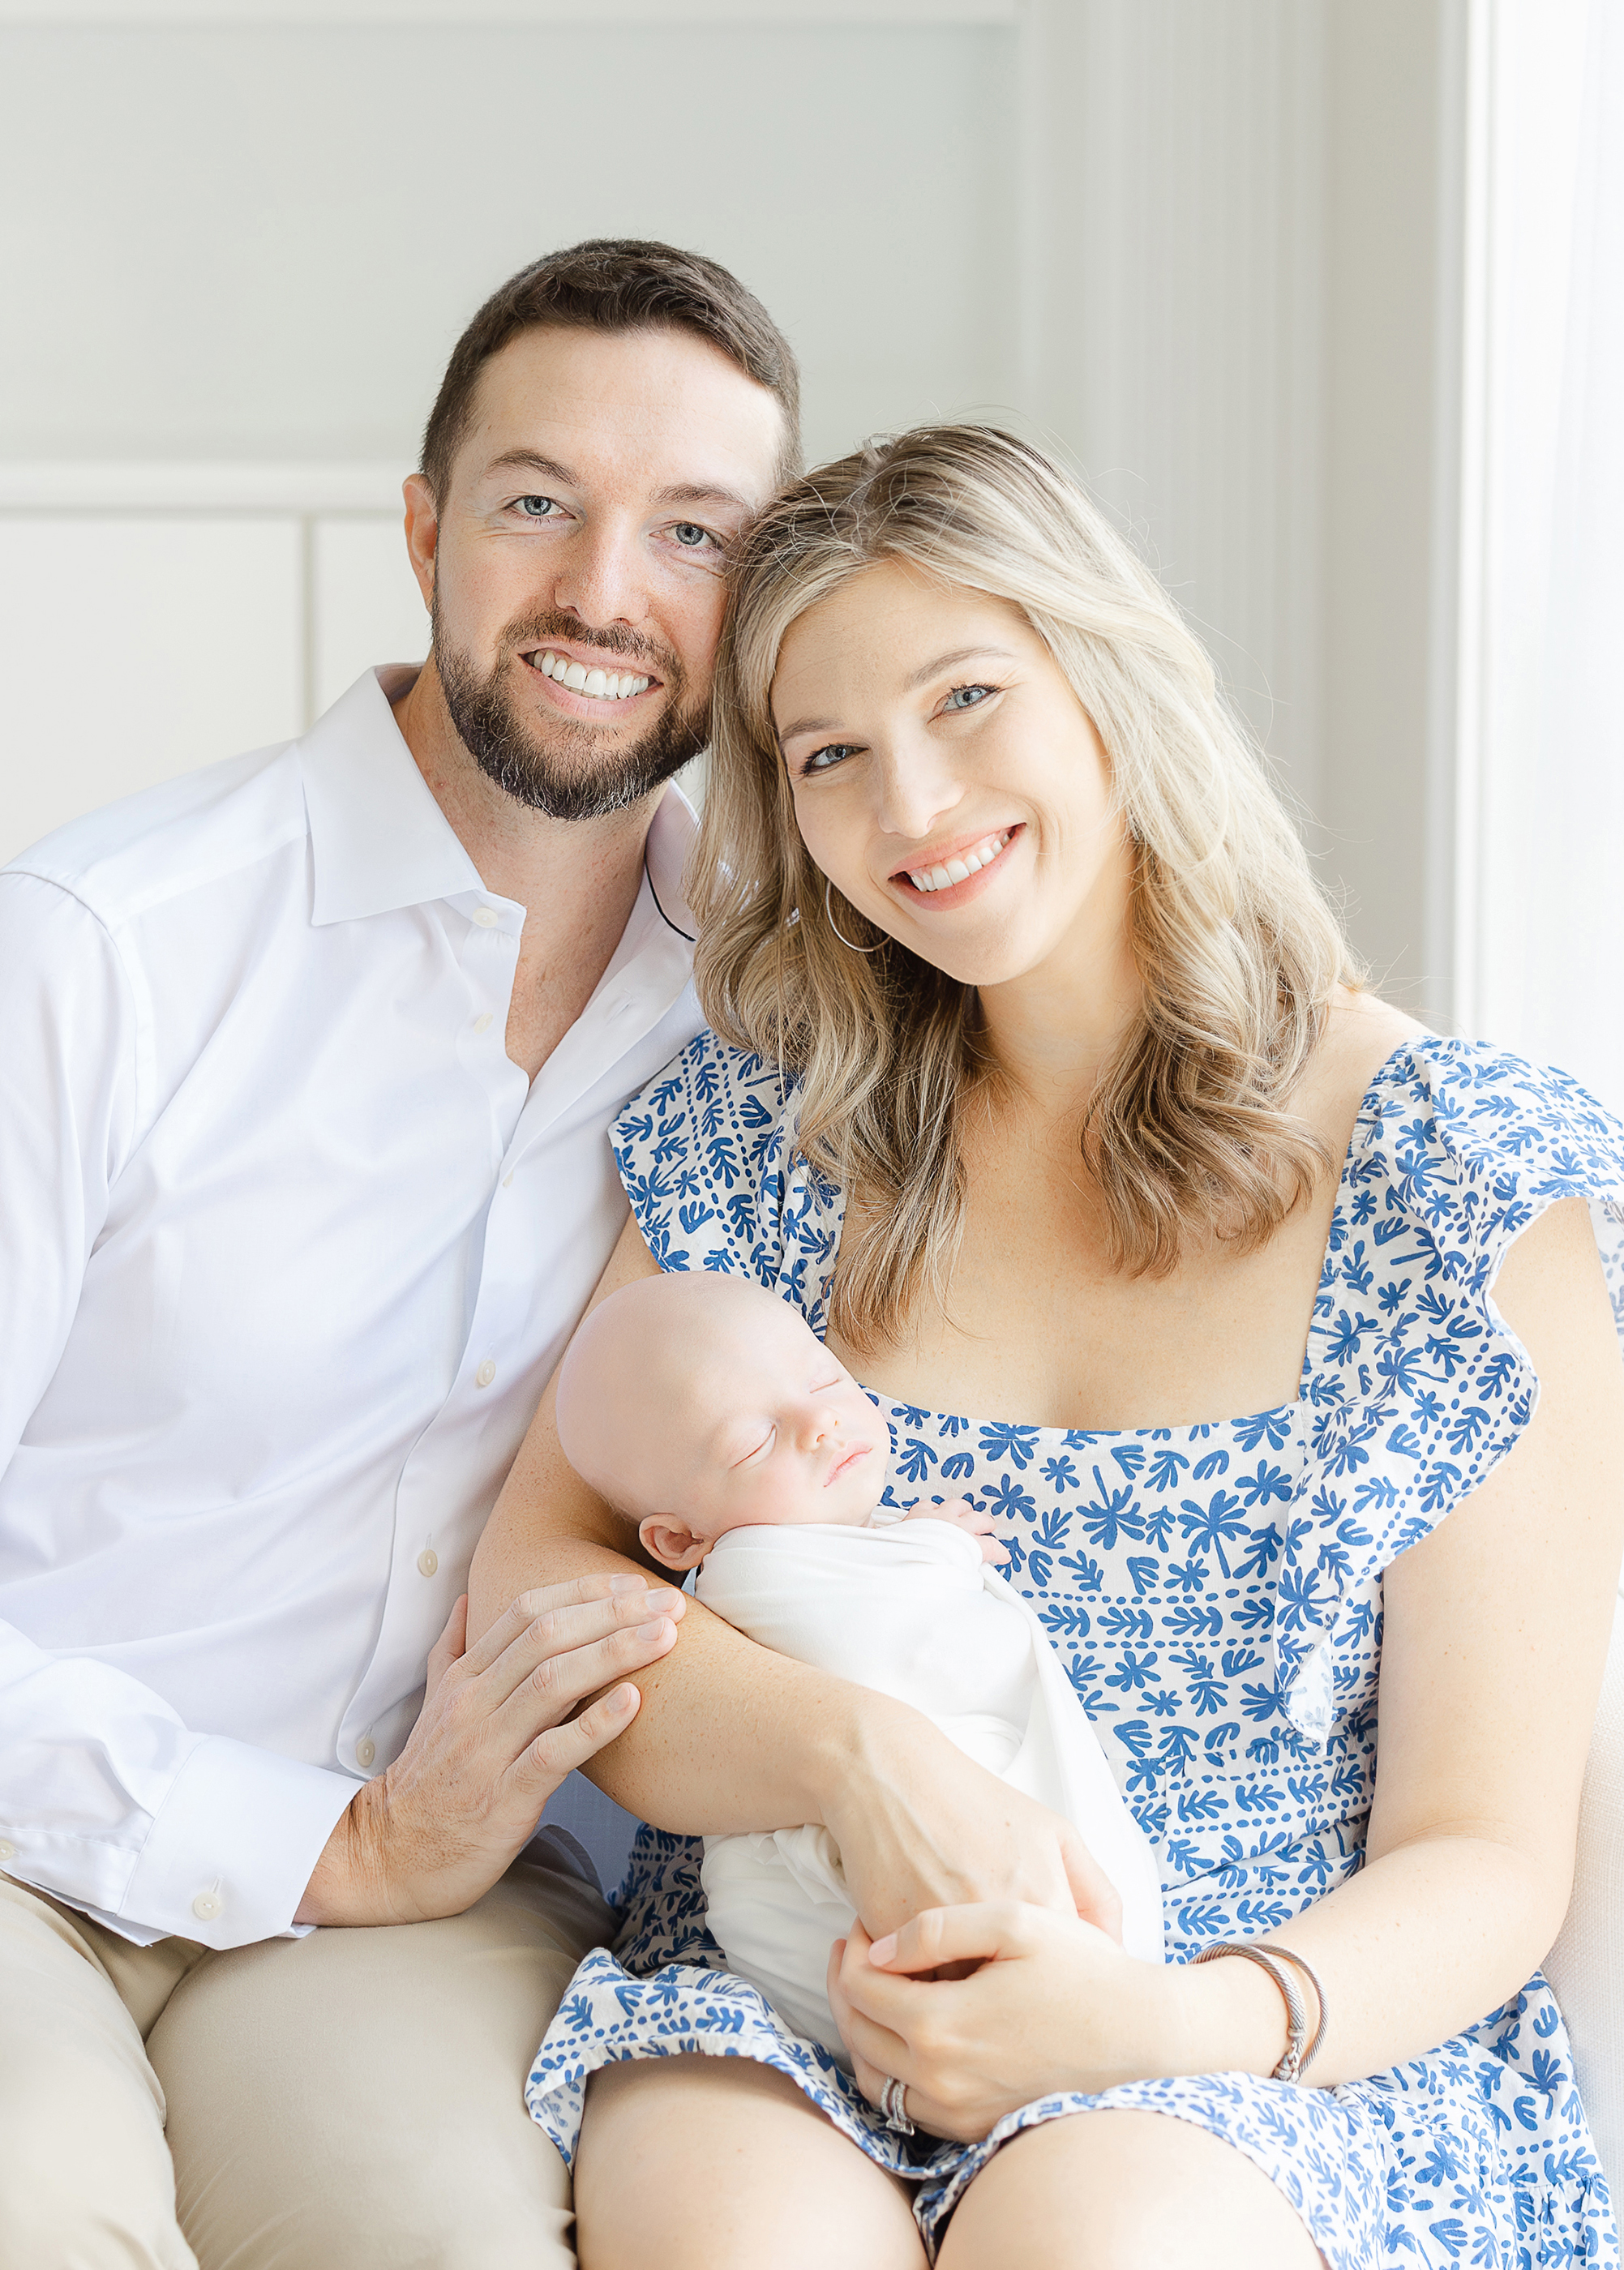 Airy newborn portrait session at home with newborn baby boy.